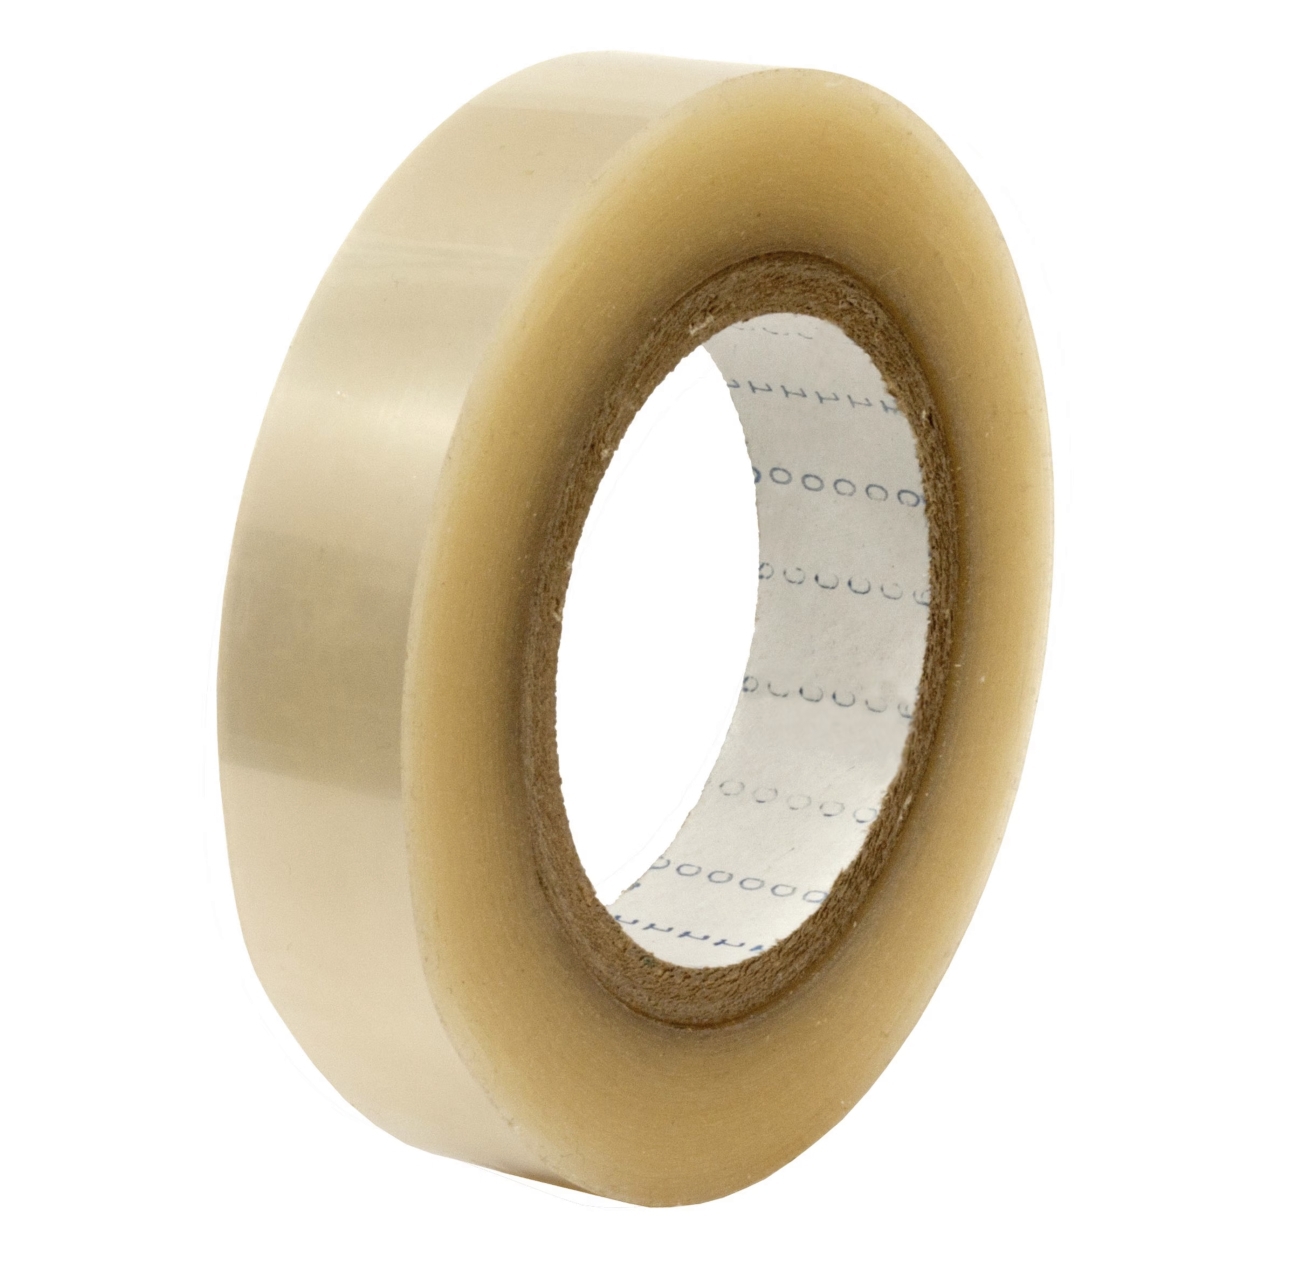 S-K-S double-sided adhesive tape with polyester backing 960, transparent, 38 mm x 66 m, silicone adhesive, 0.085 mm